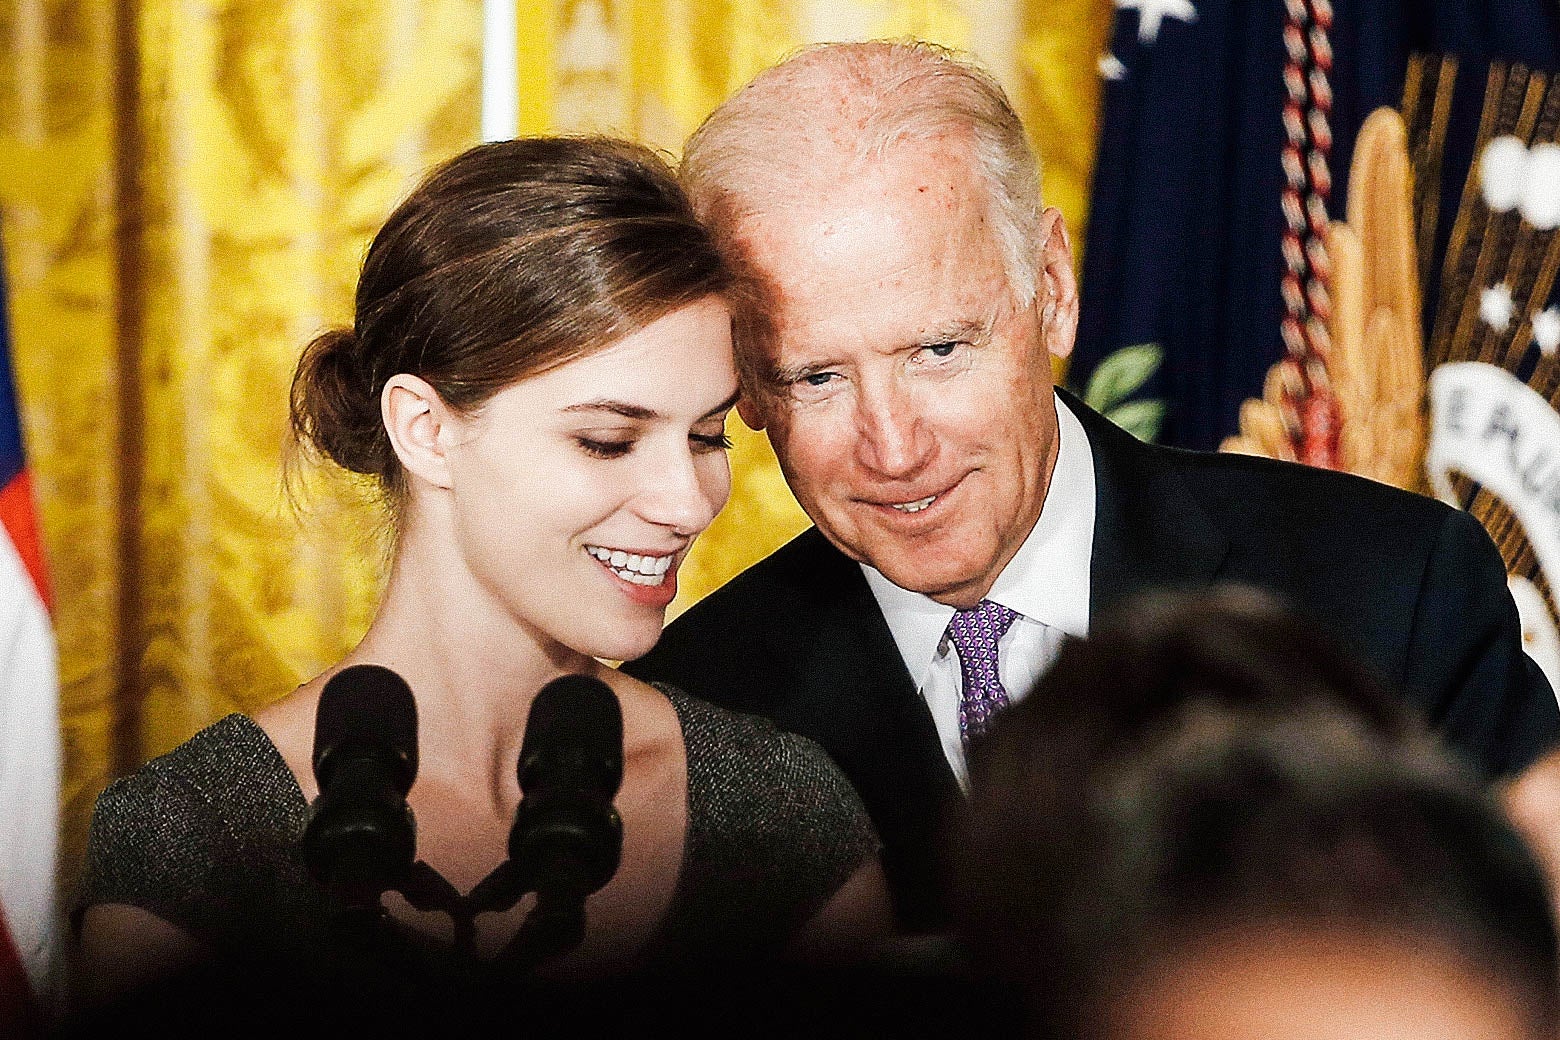 Lilly Jay, a survivor of sexual assault, stands with Vice President Joe Biden at the launch of the “It’s On Us” campaign at the White House on Sept. 19, 2014. Biden is leaning close enough that his head is almost touching Jay's.